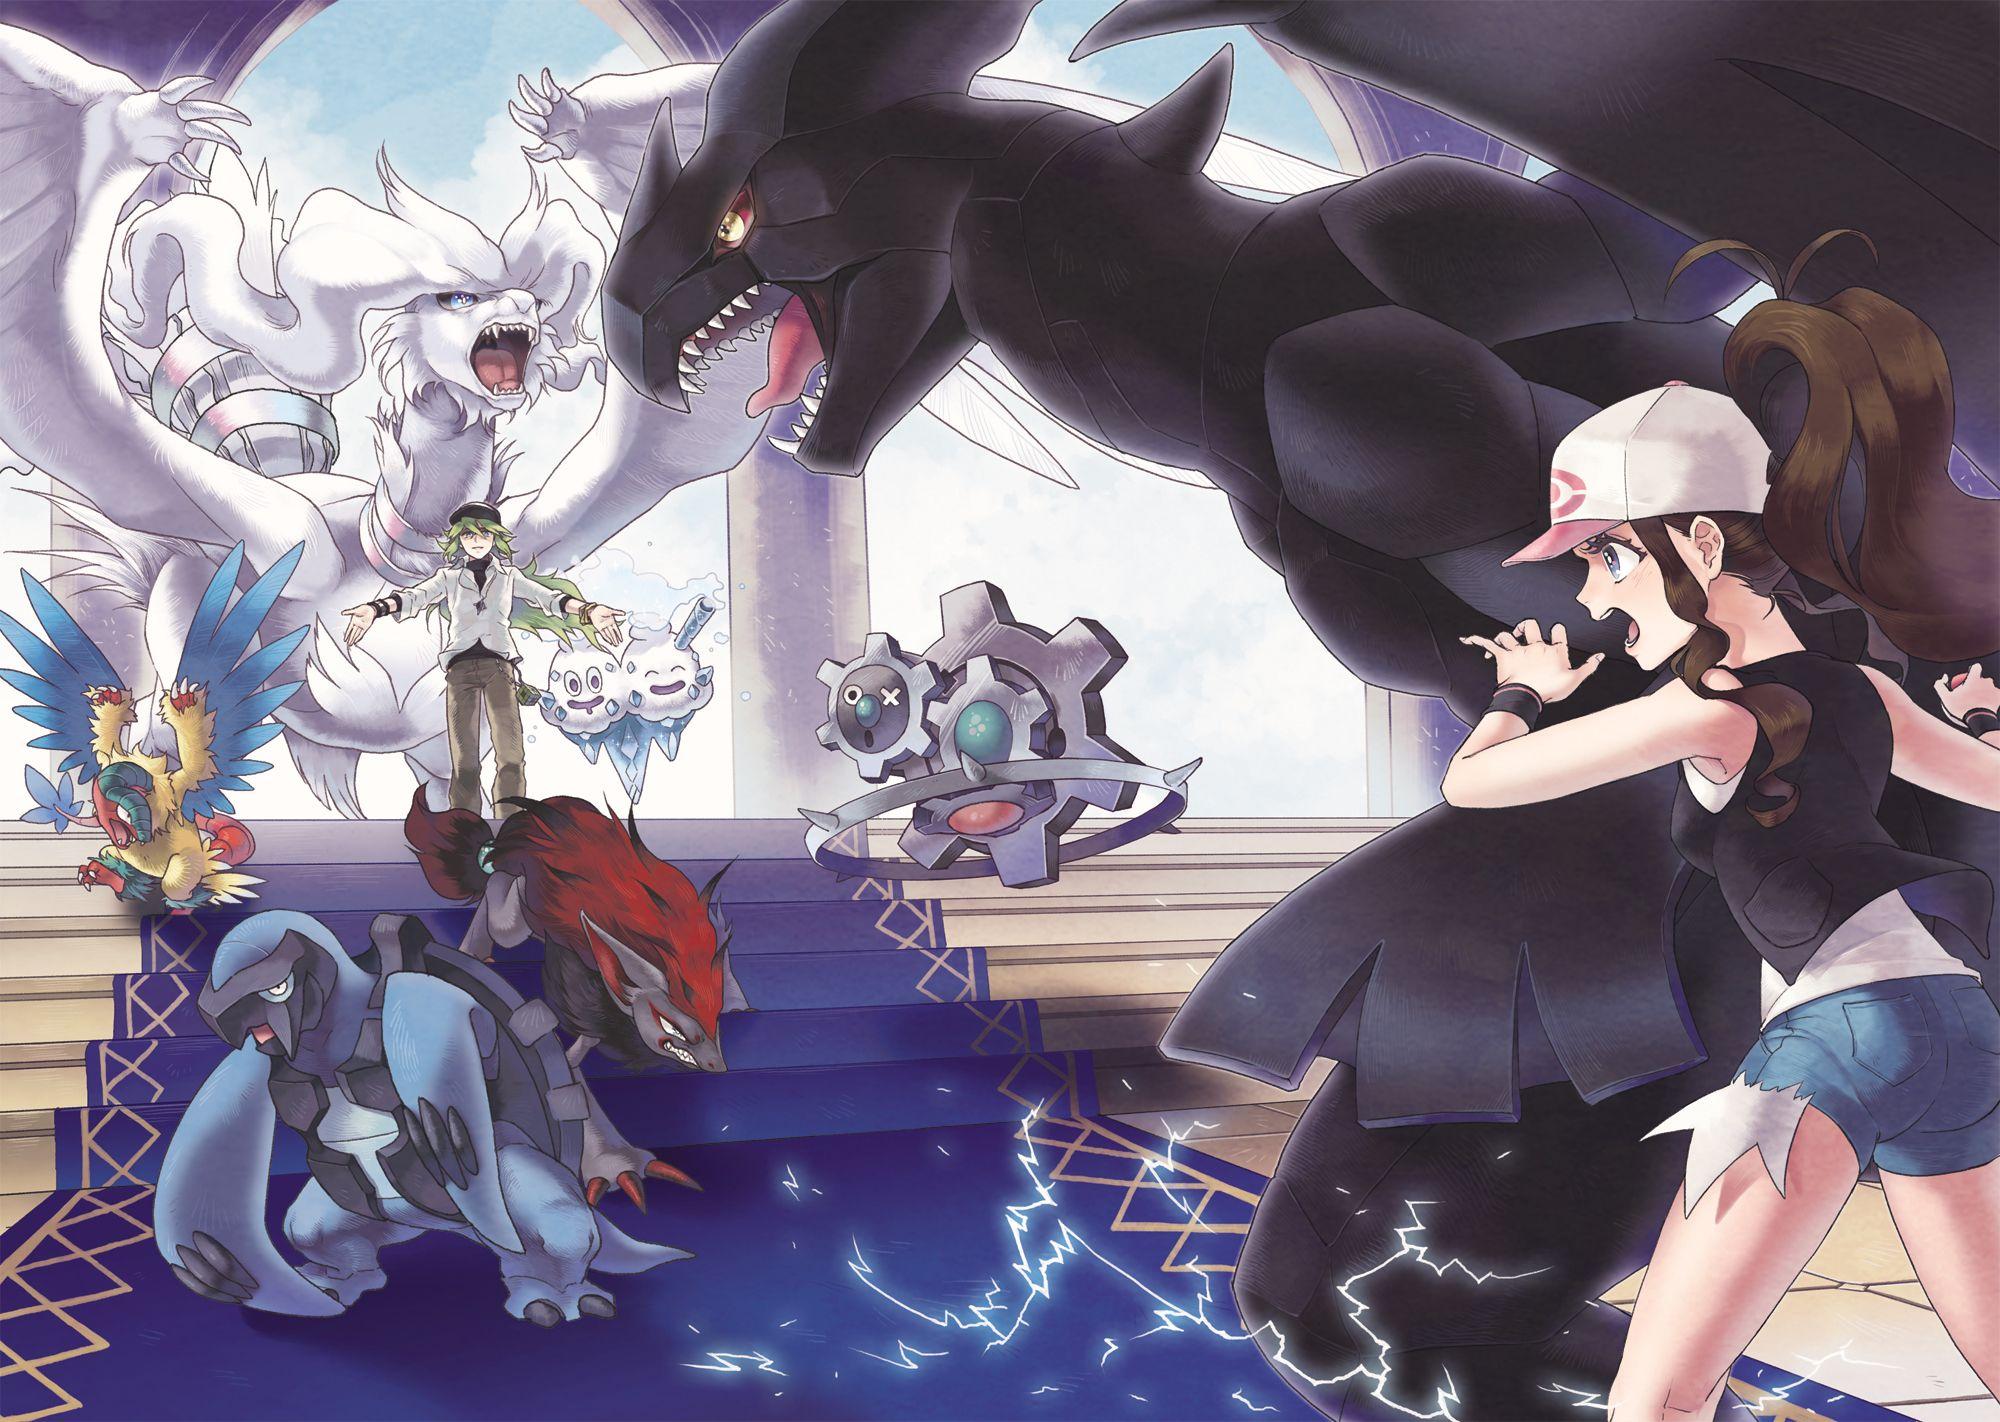 archeops, carracosta, klinklang, n, reshiram, and others pokemon